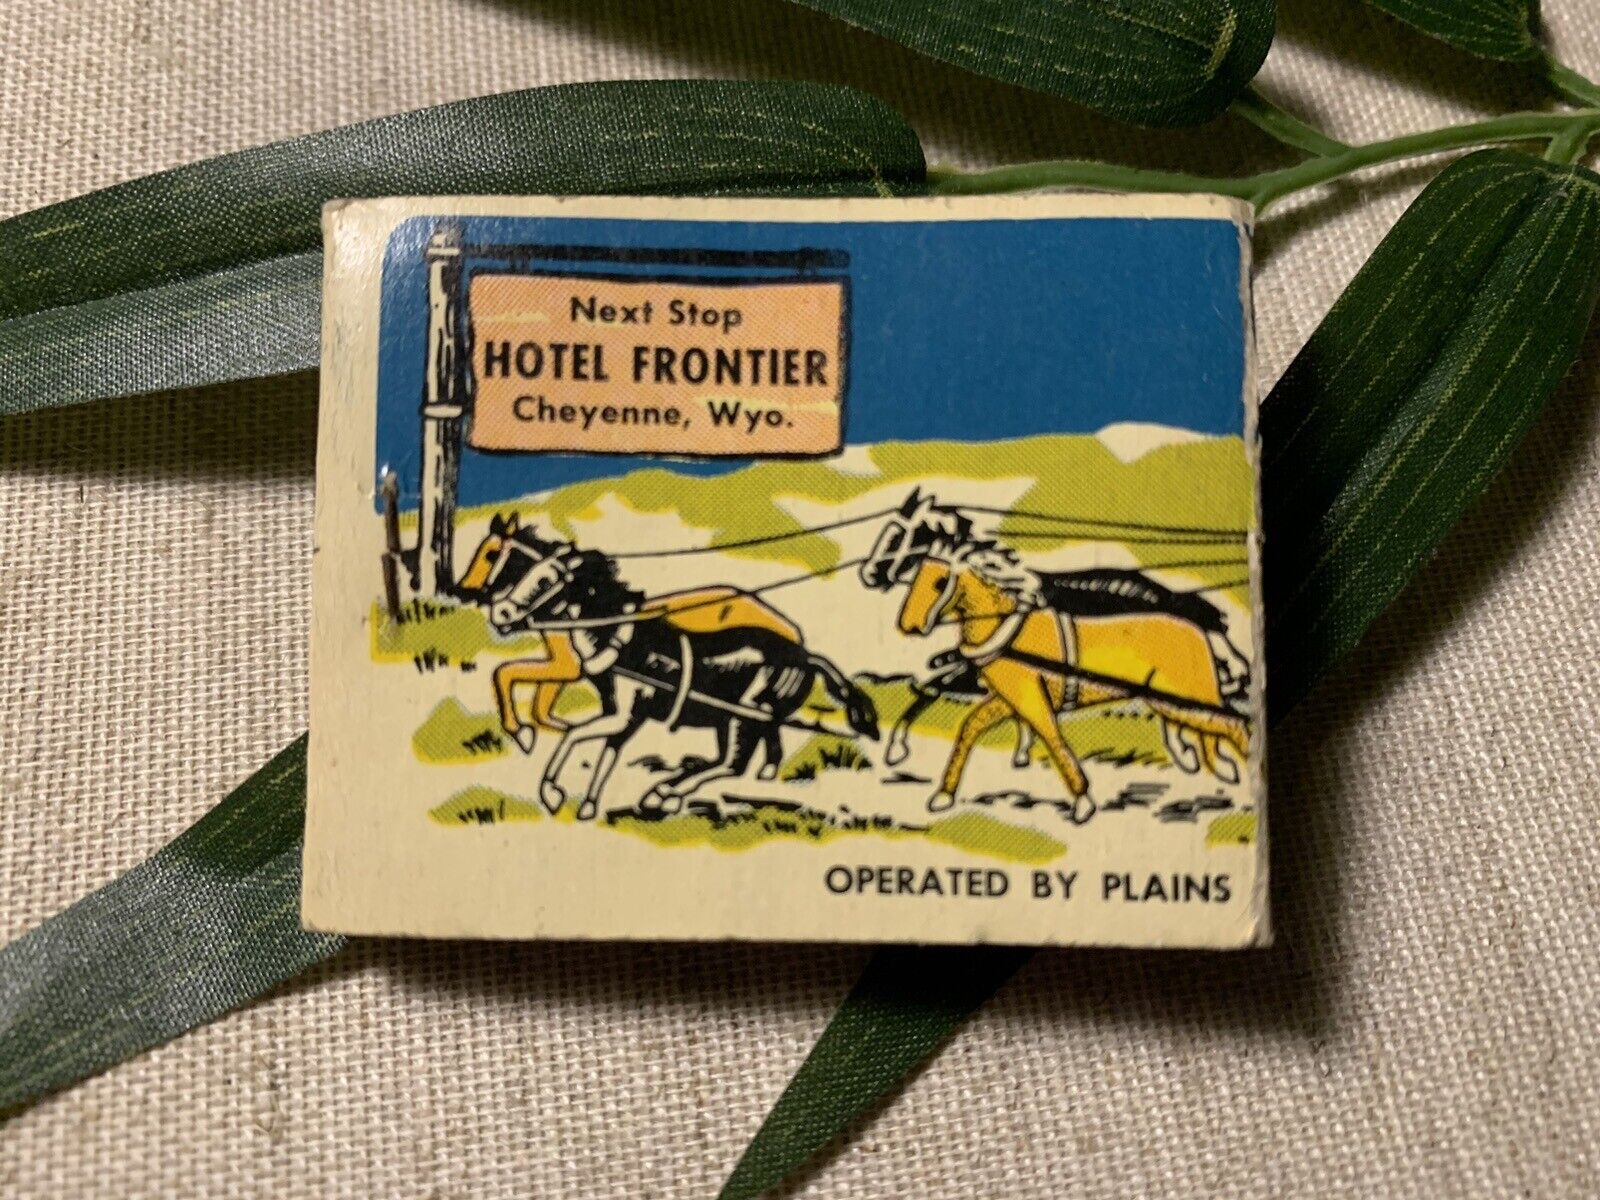 Wyoming Hotel Frontier & Coffee Shop Vintage Matchbook Cover ~